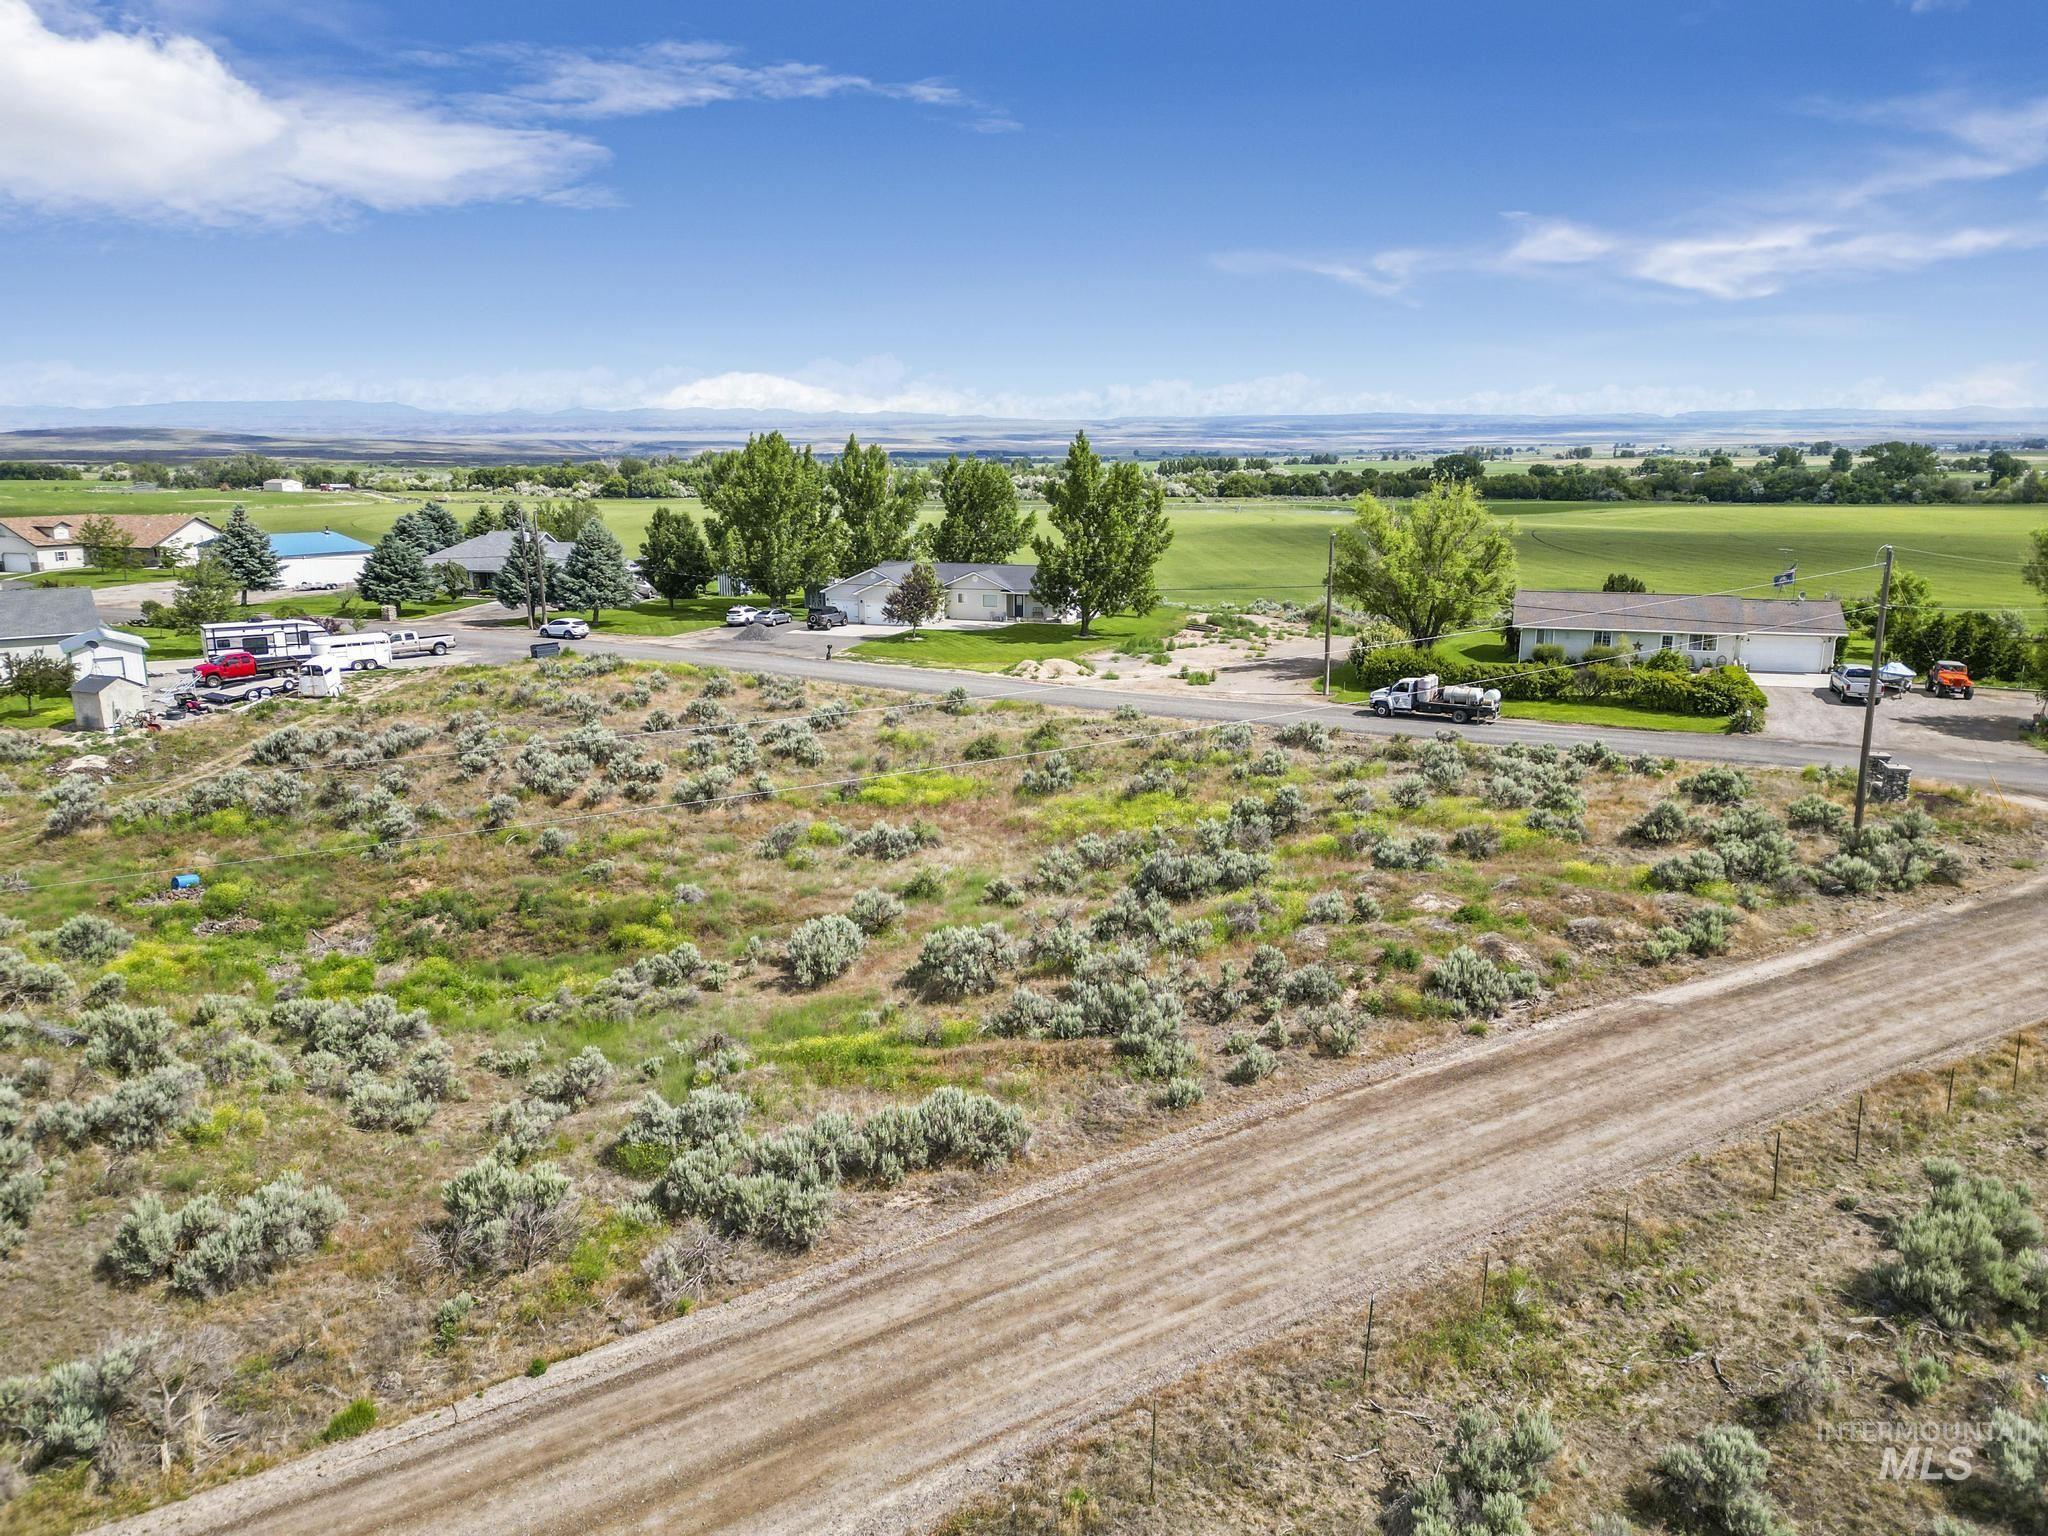 577 River View Dr, Gooding, Idaho 83330, Land For Sale, Price $37,500,MLS 98900855